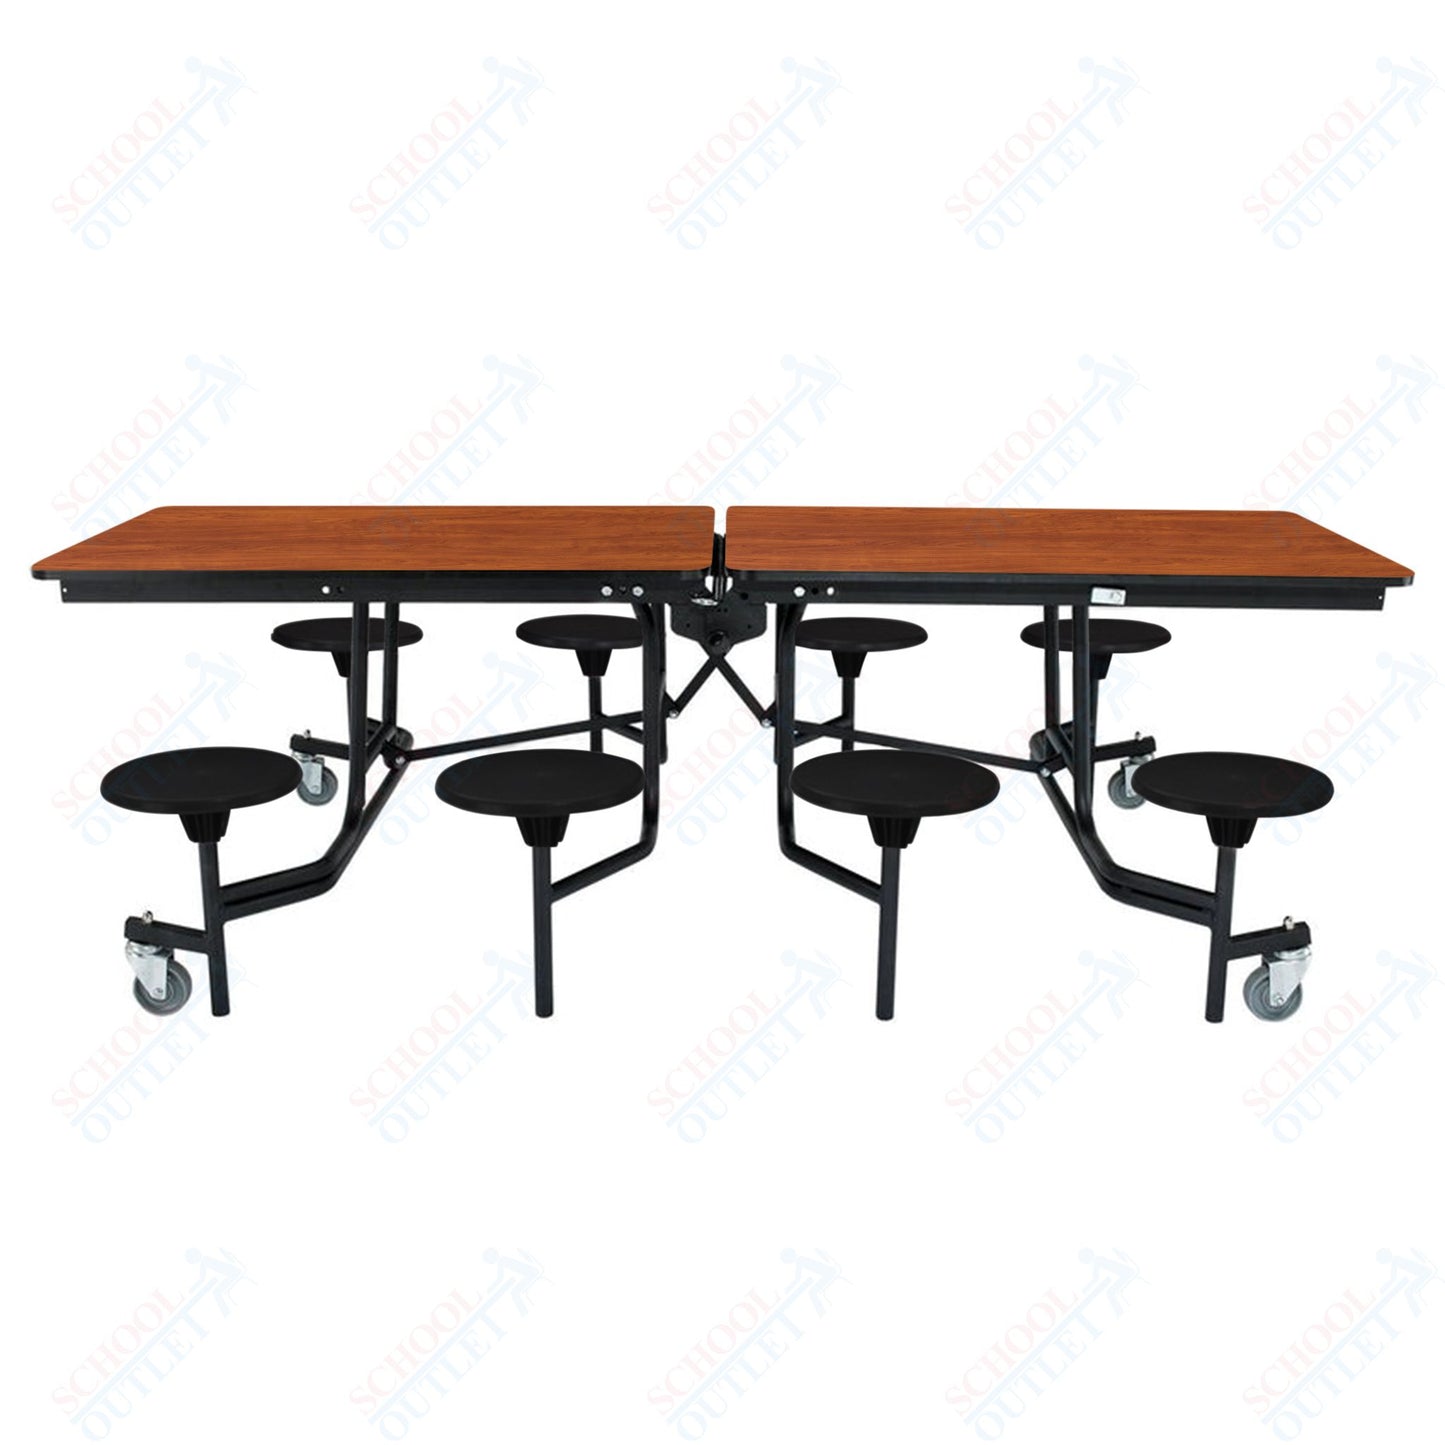 NPS Mobile Cafeteria Table - 30" W x 8' L - 8 Stools - Plywood Core - T-Molding Edge - Black Powdercoated Frame